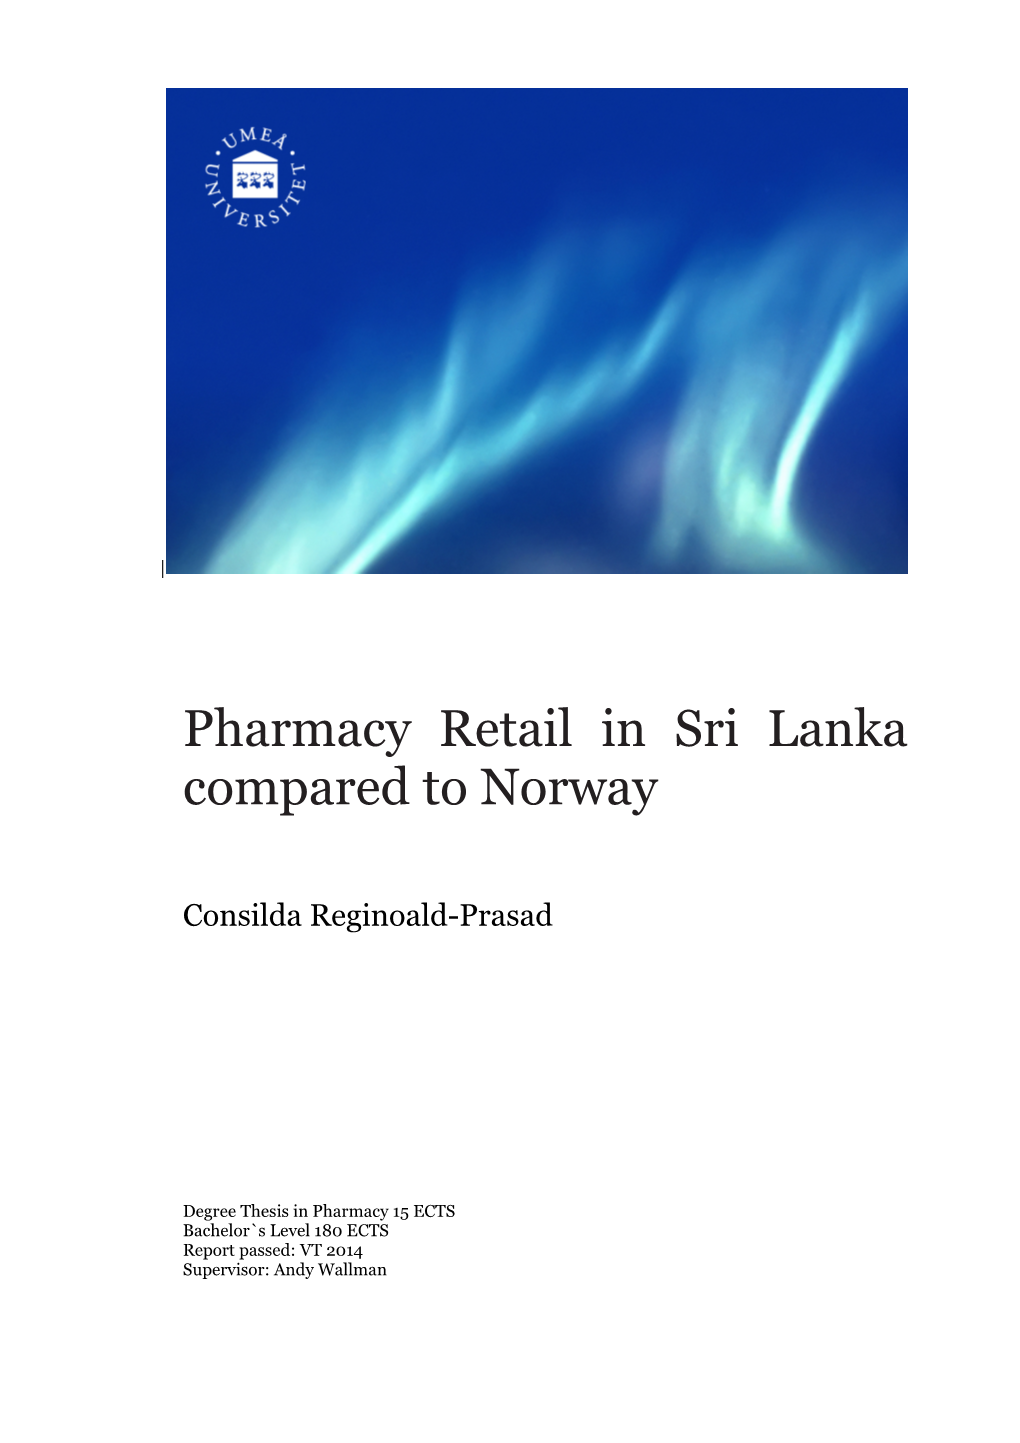 Pharmacy Retail in Sri Lanka Compared to Norway